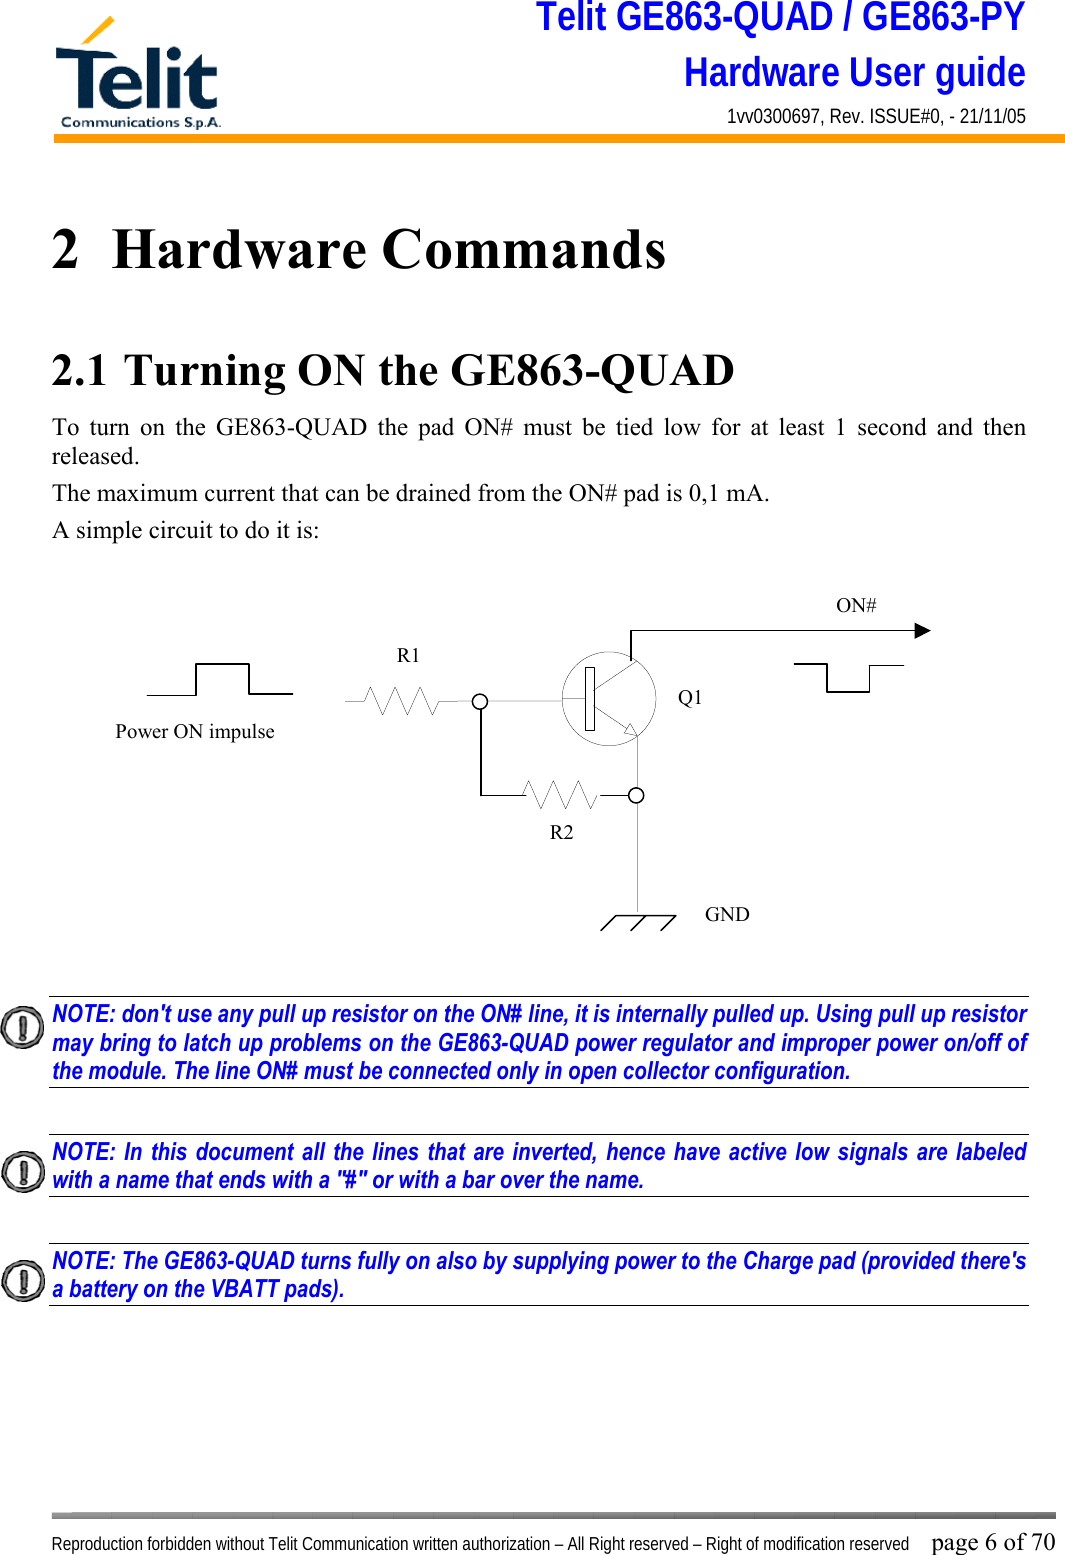 Telit GE863-QUAD / GE863-PY Hardware User guide 1vv0300697, Rev. ISSUE#0, - 21/11/05    Reproduction forbidden without Telit Communication written authorization – All Right reserved – Right of modification reserved page 6 of 70 2  Hardware Commands 2.1  Turning ON the GE863-QUAD To turn on the GE863-QUAD the pad ON# must be tied low for at least 1 second and then released. The maximum current that can be drained from the ON# pad is 0,1 mA. A simple circuit to do it is:   NOTE: don&apos;t use any pull up resistor on the ON# line, it is internally pulled up. Using pull up resistor may bring to latch up problems on the GE863-QUAD power regulator and improper power on/off of the module. The line ON# must be connected only in open collector configuration.  NOTE: In this document all the lines that are inverted, hence have active low signals are labeled with a name that ends with a &quot;#&quot; or with a bar over the name.  NOTE: The GE863-QUAD turns fully on also by supplying power to the Charge pad (provided there&apos;s a battery on the VBATT pads).        ON#Power ON impulse  GNDR1R2Q1